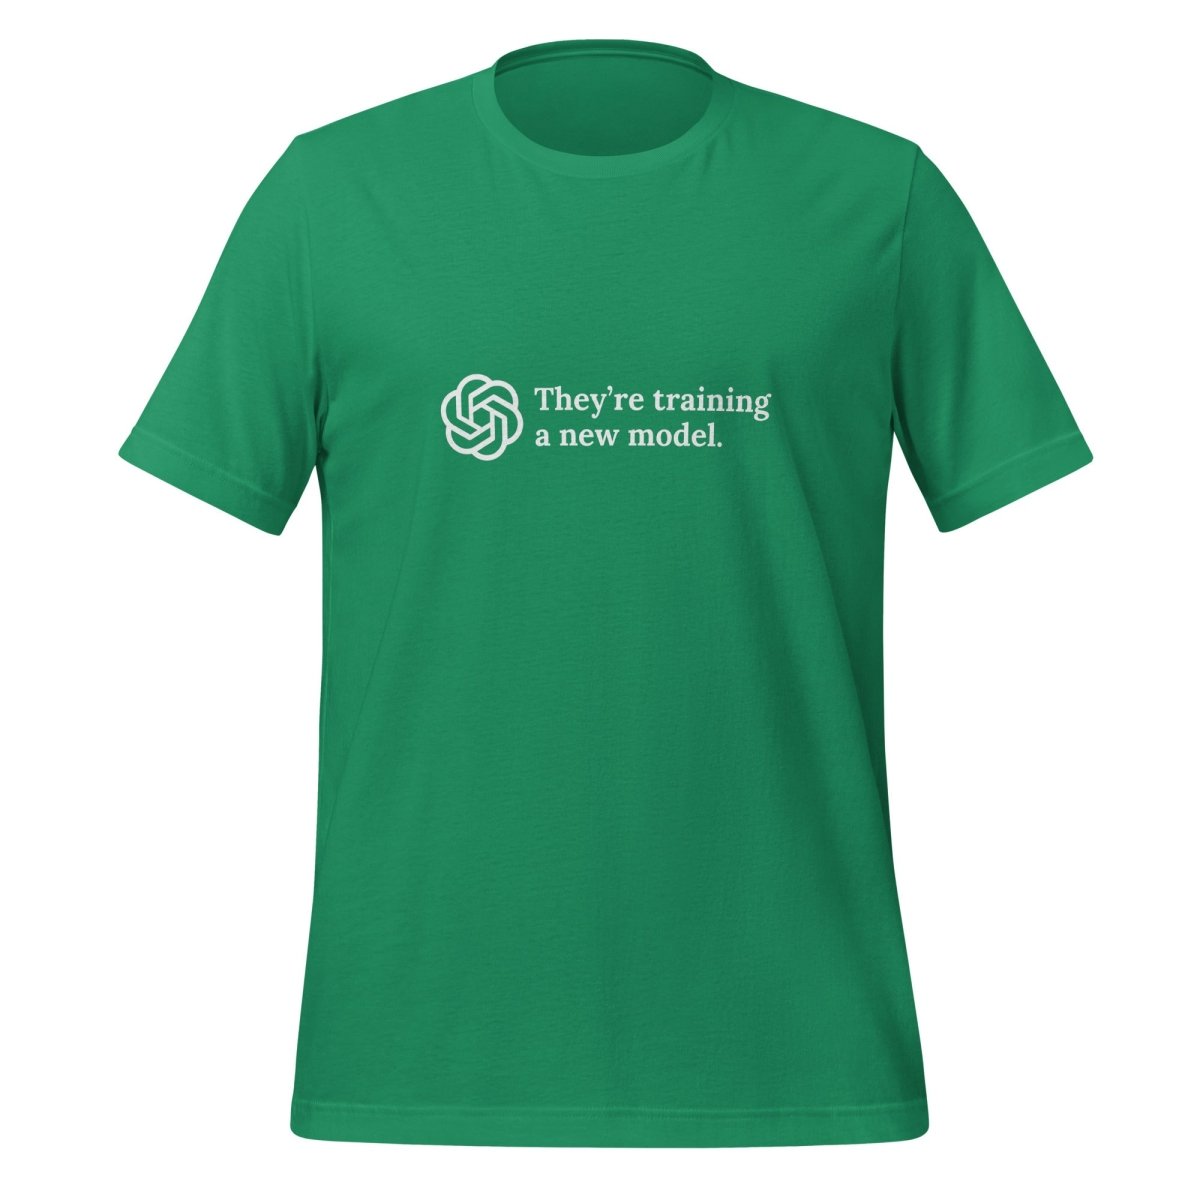 They're training a new model. T - Shirt (unisex) - Kelly - AI Store